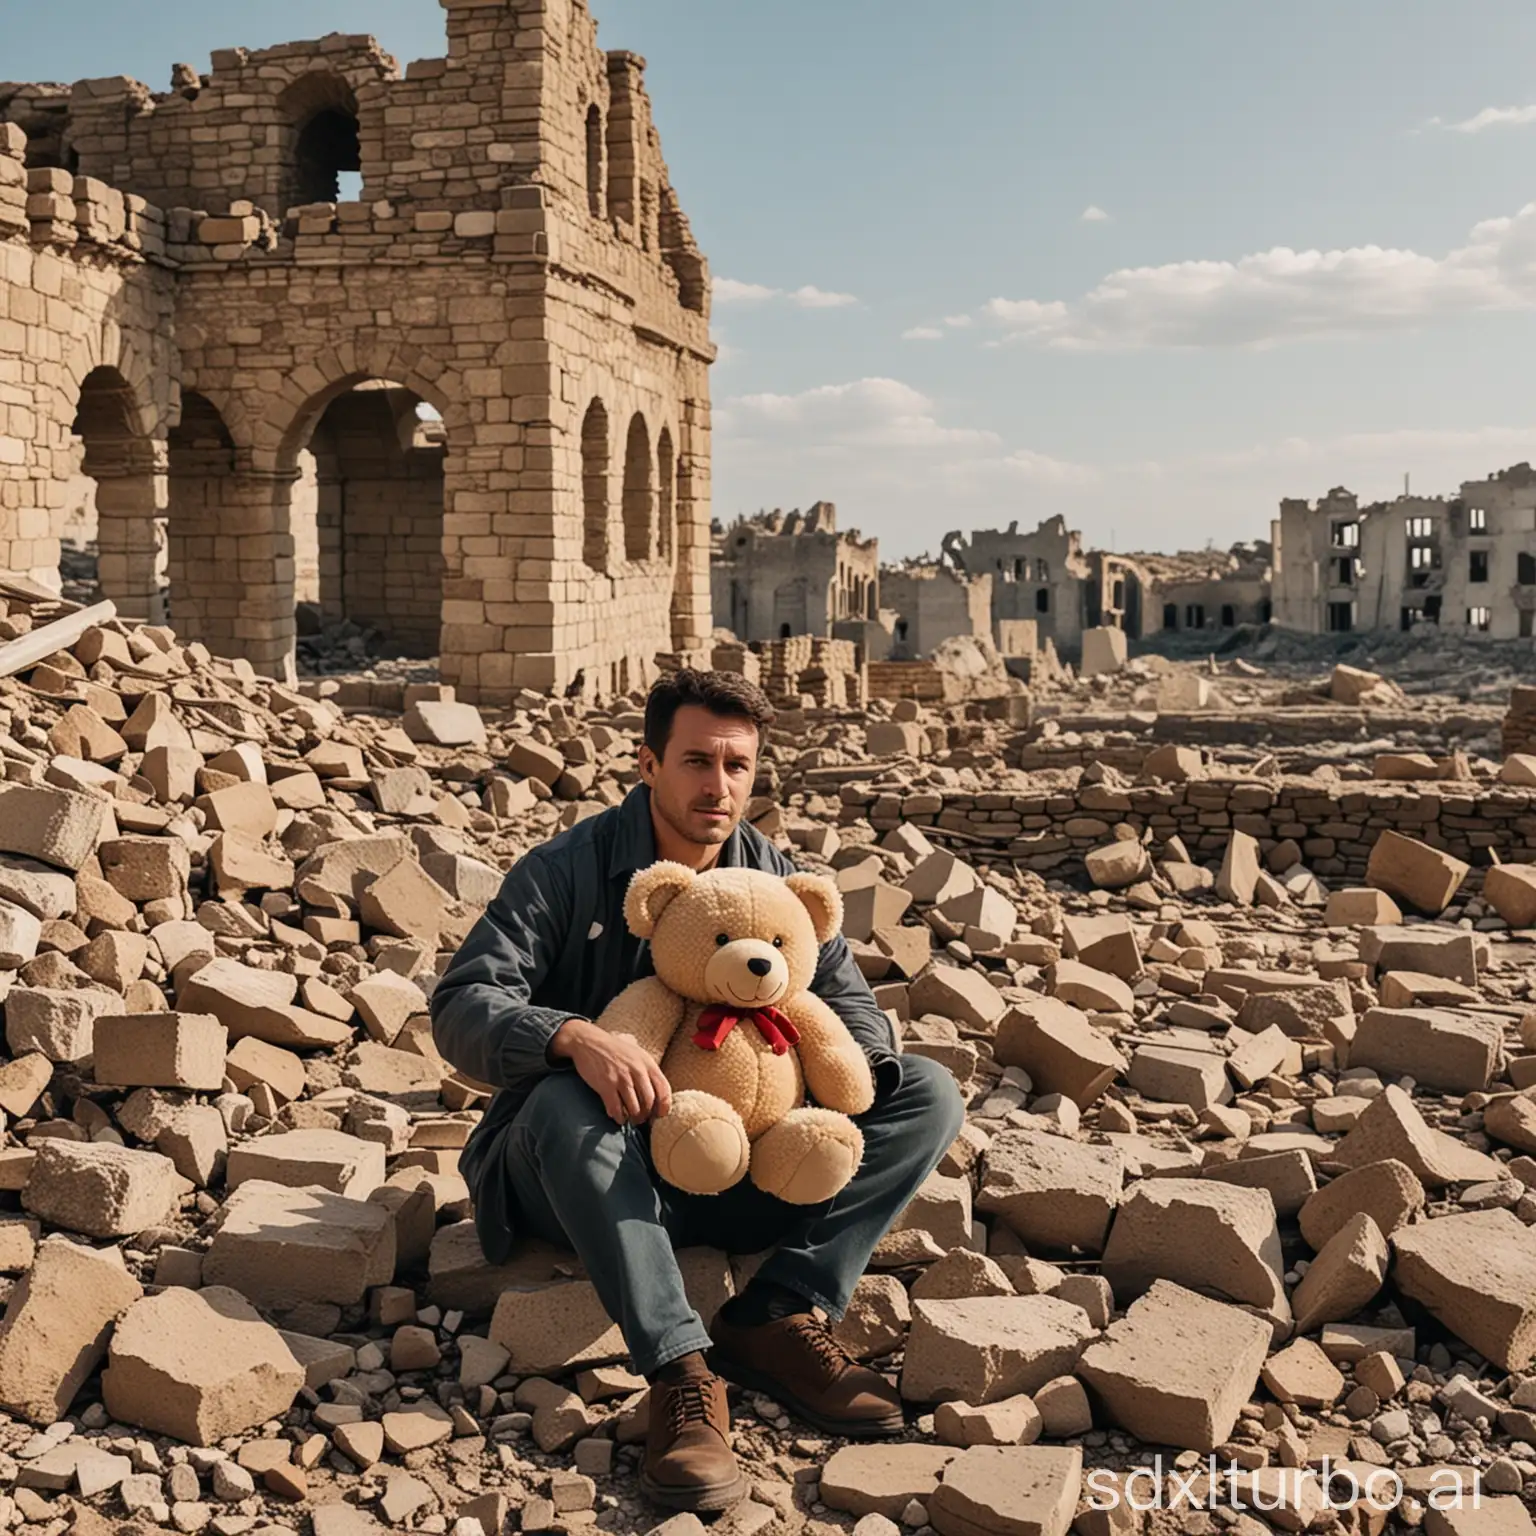 a man is sitting on the ruins of a building, a teddy bear is next to him